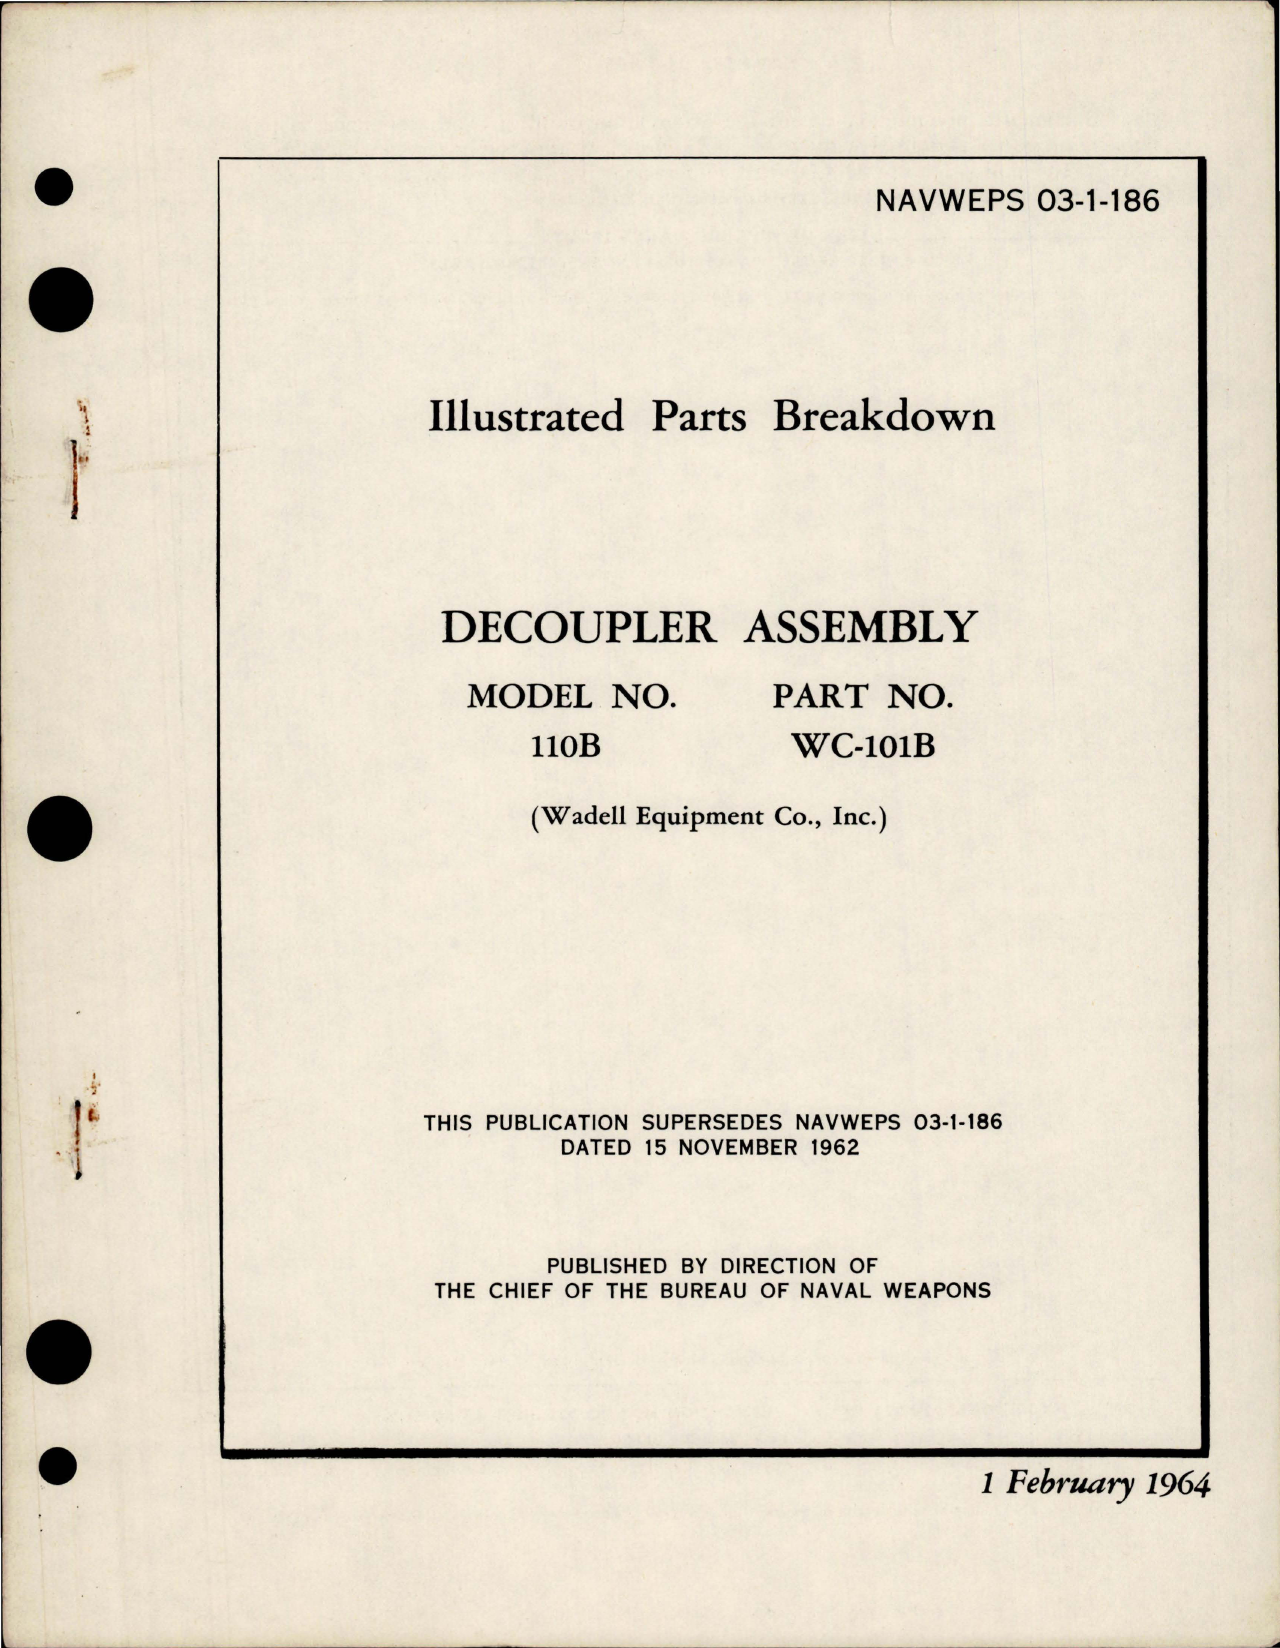 Sample page 1 from AirCorps Library document: Illustrated Parts Breakdown for Decoupler Assembly - Model 110B - Part WC-101B 